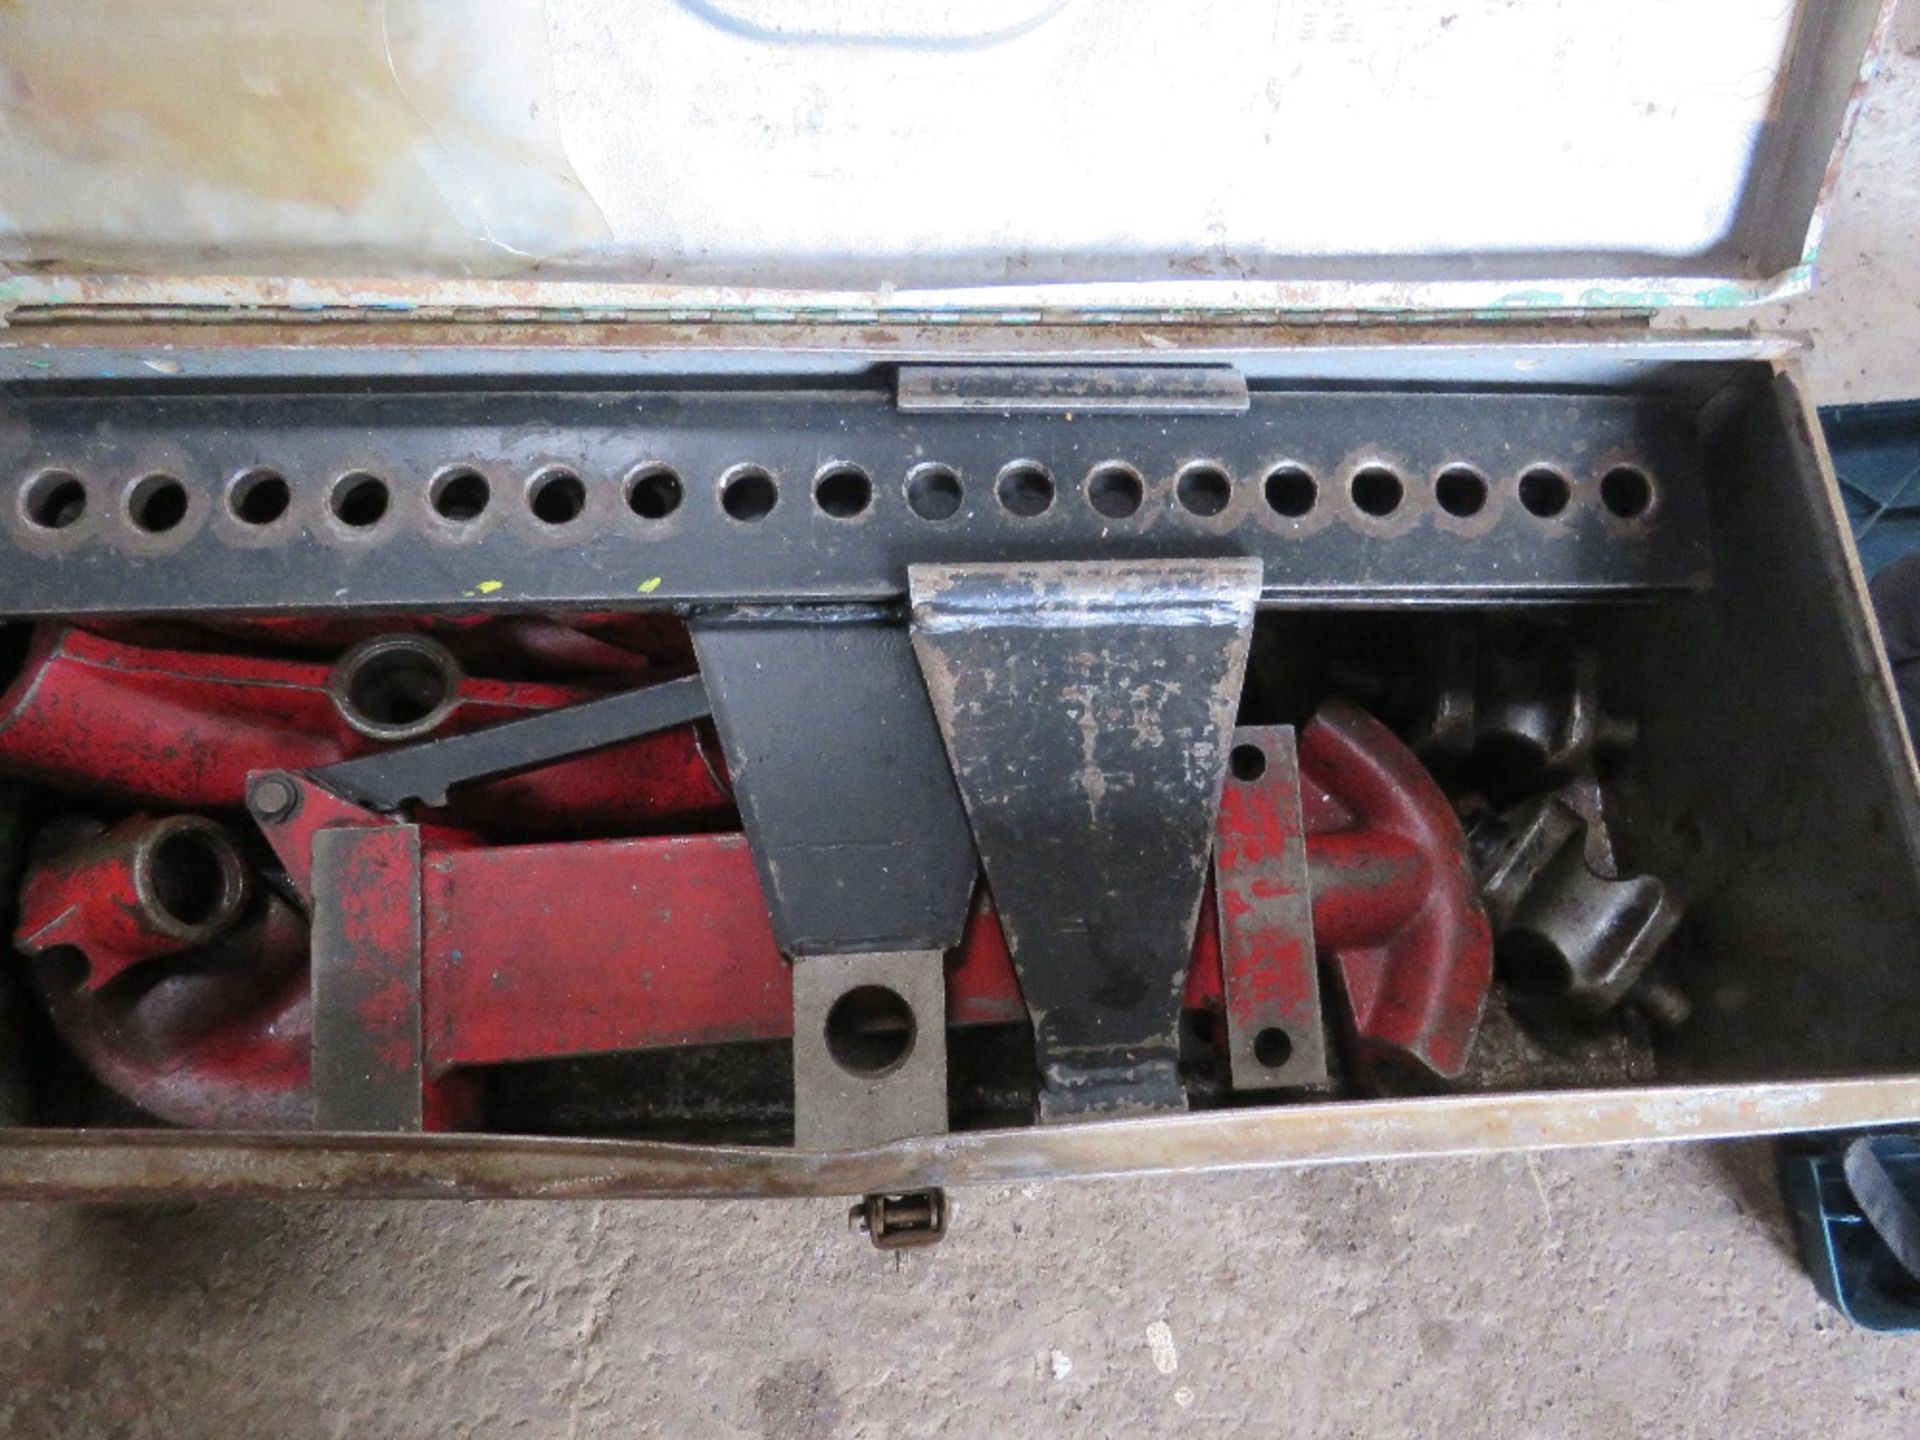 HEAVY DUTY HYDRAULIC PIPE BENDING SET IN A BOX. (VERY HEAVY!!) SOURCED FROM LOCAL DEPOT CLOSURE. - Image 4 of 4